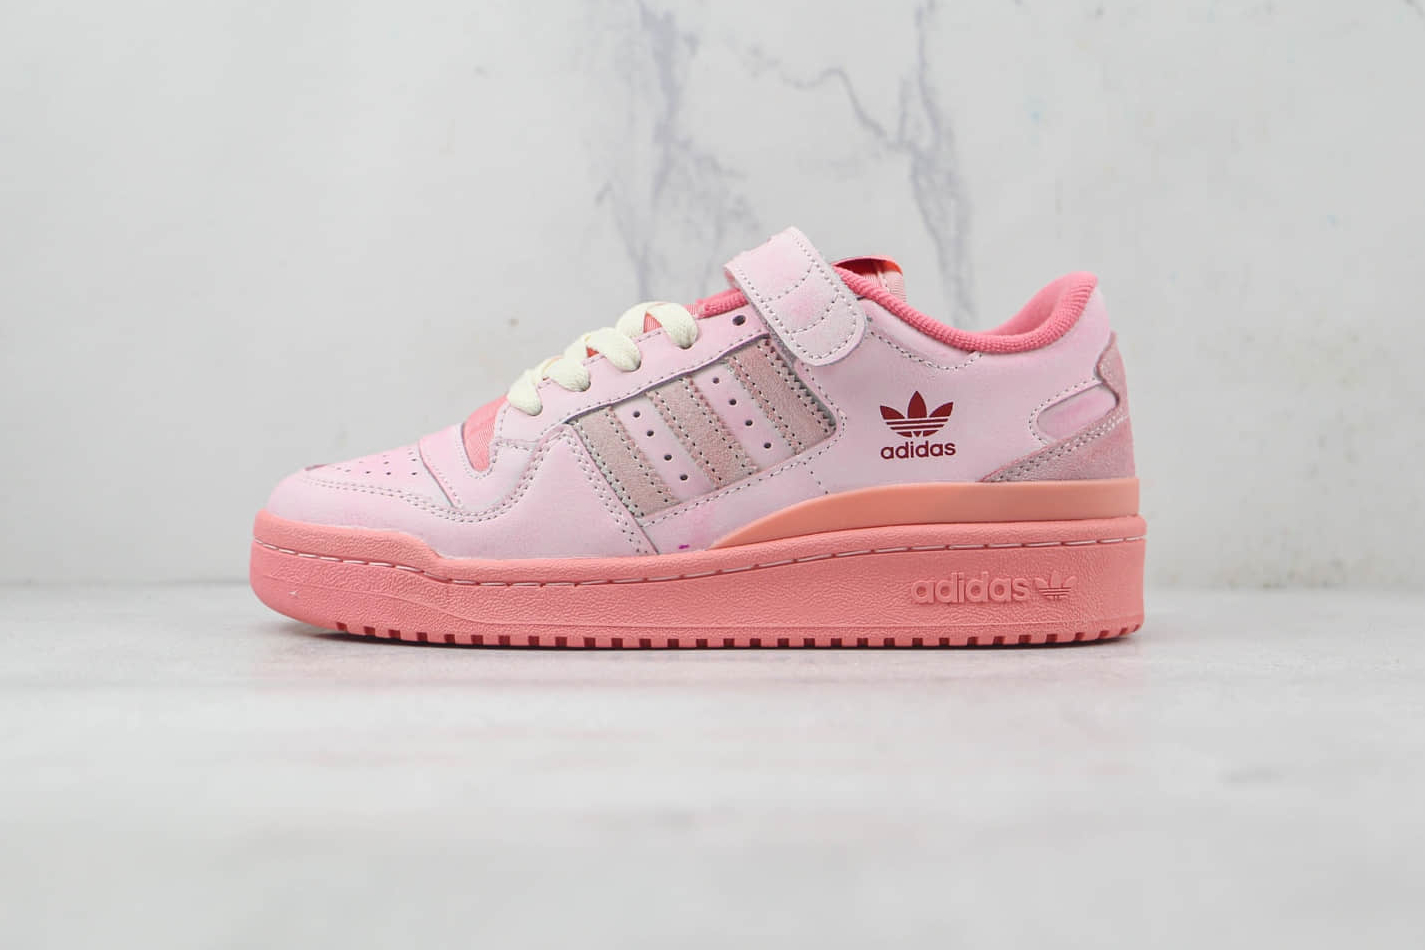 Adidas Forum 84 Low 'Pink' GY6980: Stylish and Comfortable Sneakers